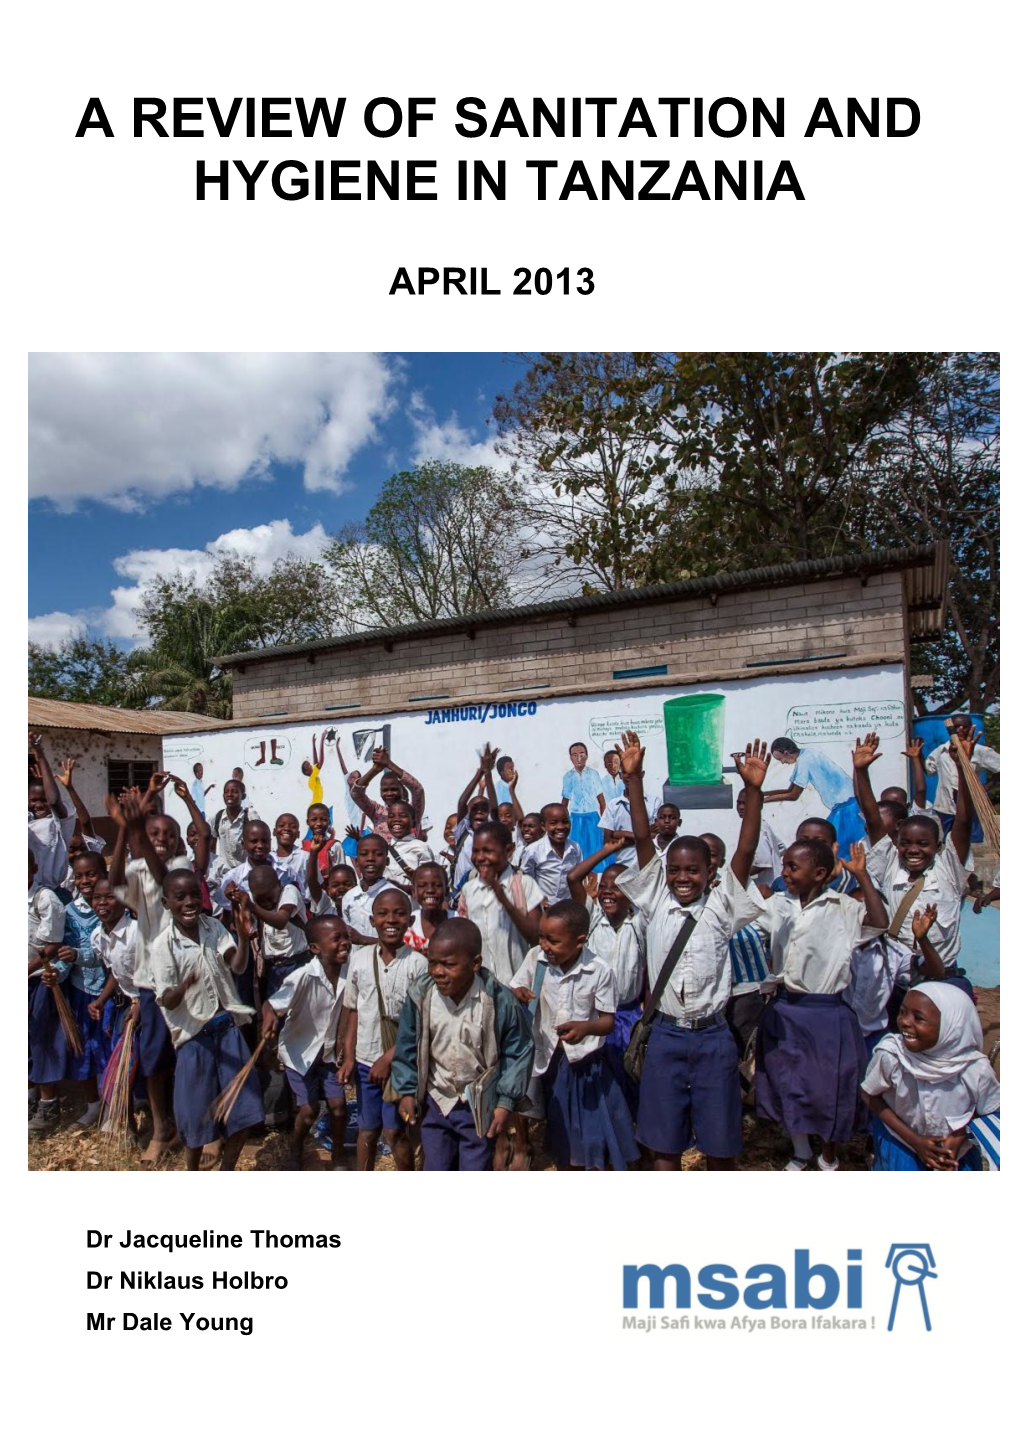 A Review of Sanitation and Hygiene in Tanzania